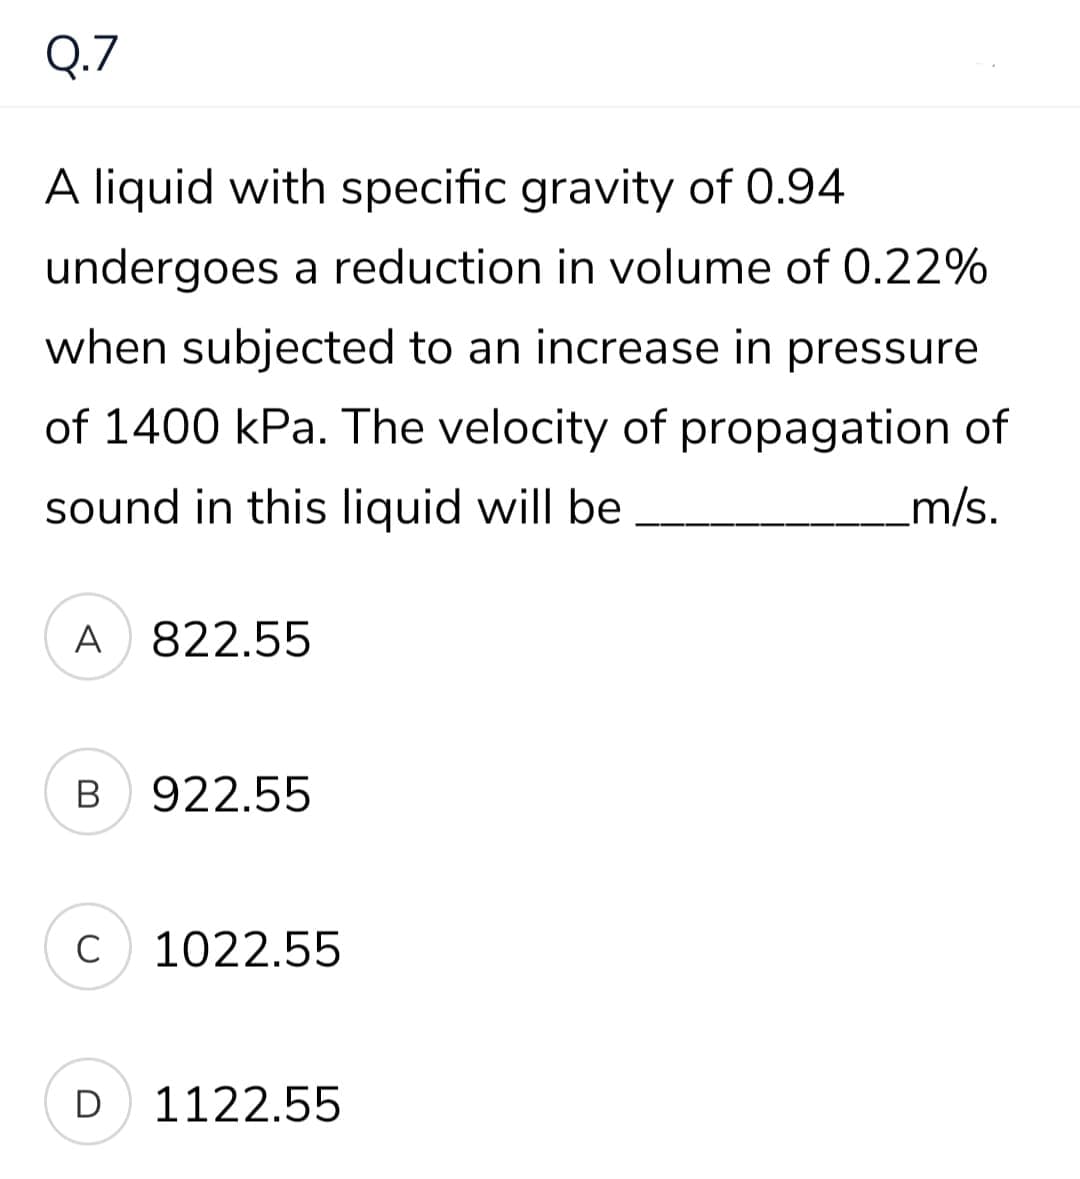 Q.7
A liquid with specific gravity of 0.94
undergoes a reduction in volume of 0.22%
when subjected to an increase in pressure
of 1400 kPa. The velocity of propagation of
sound in this liquid will be
m/s.
A 822.55
В
922.55
C
1022.55
D
1122.55
